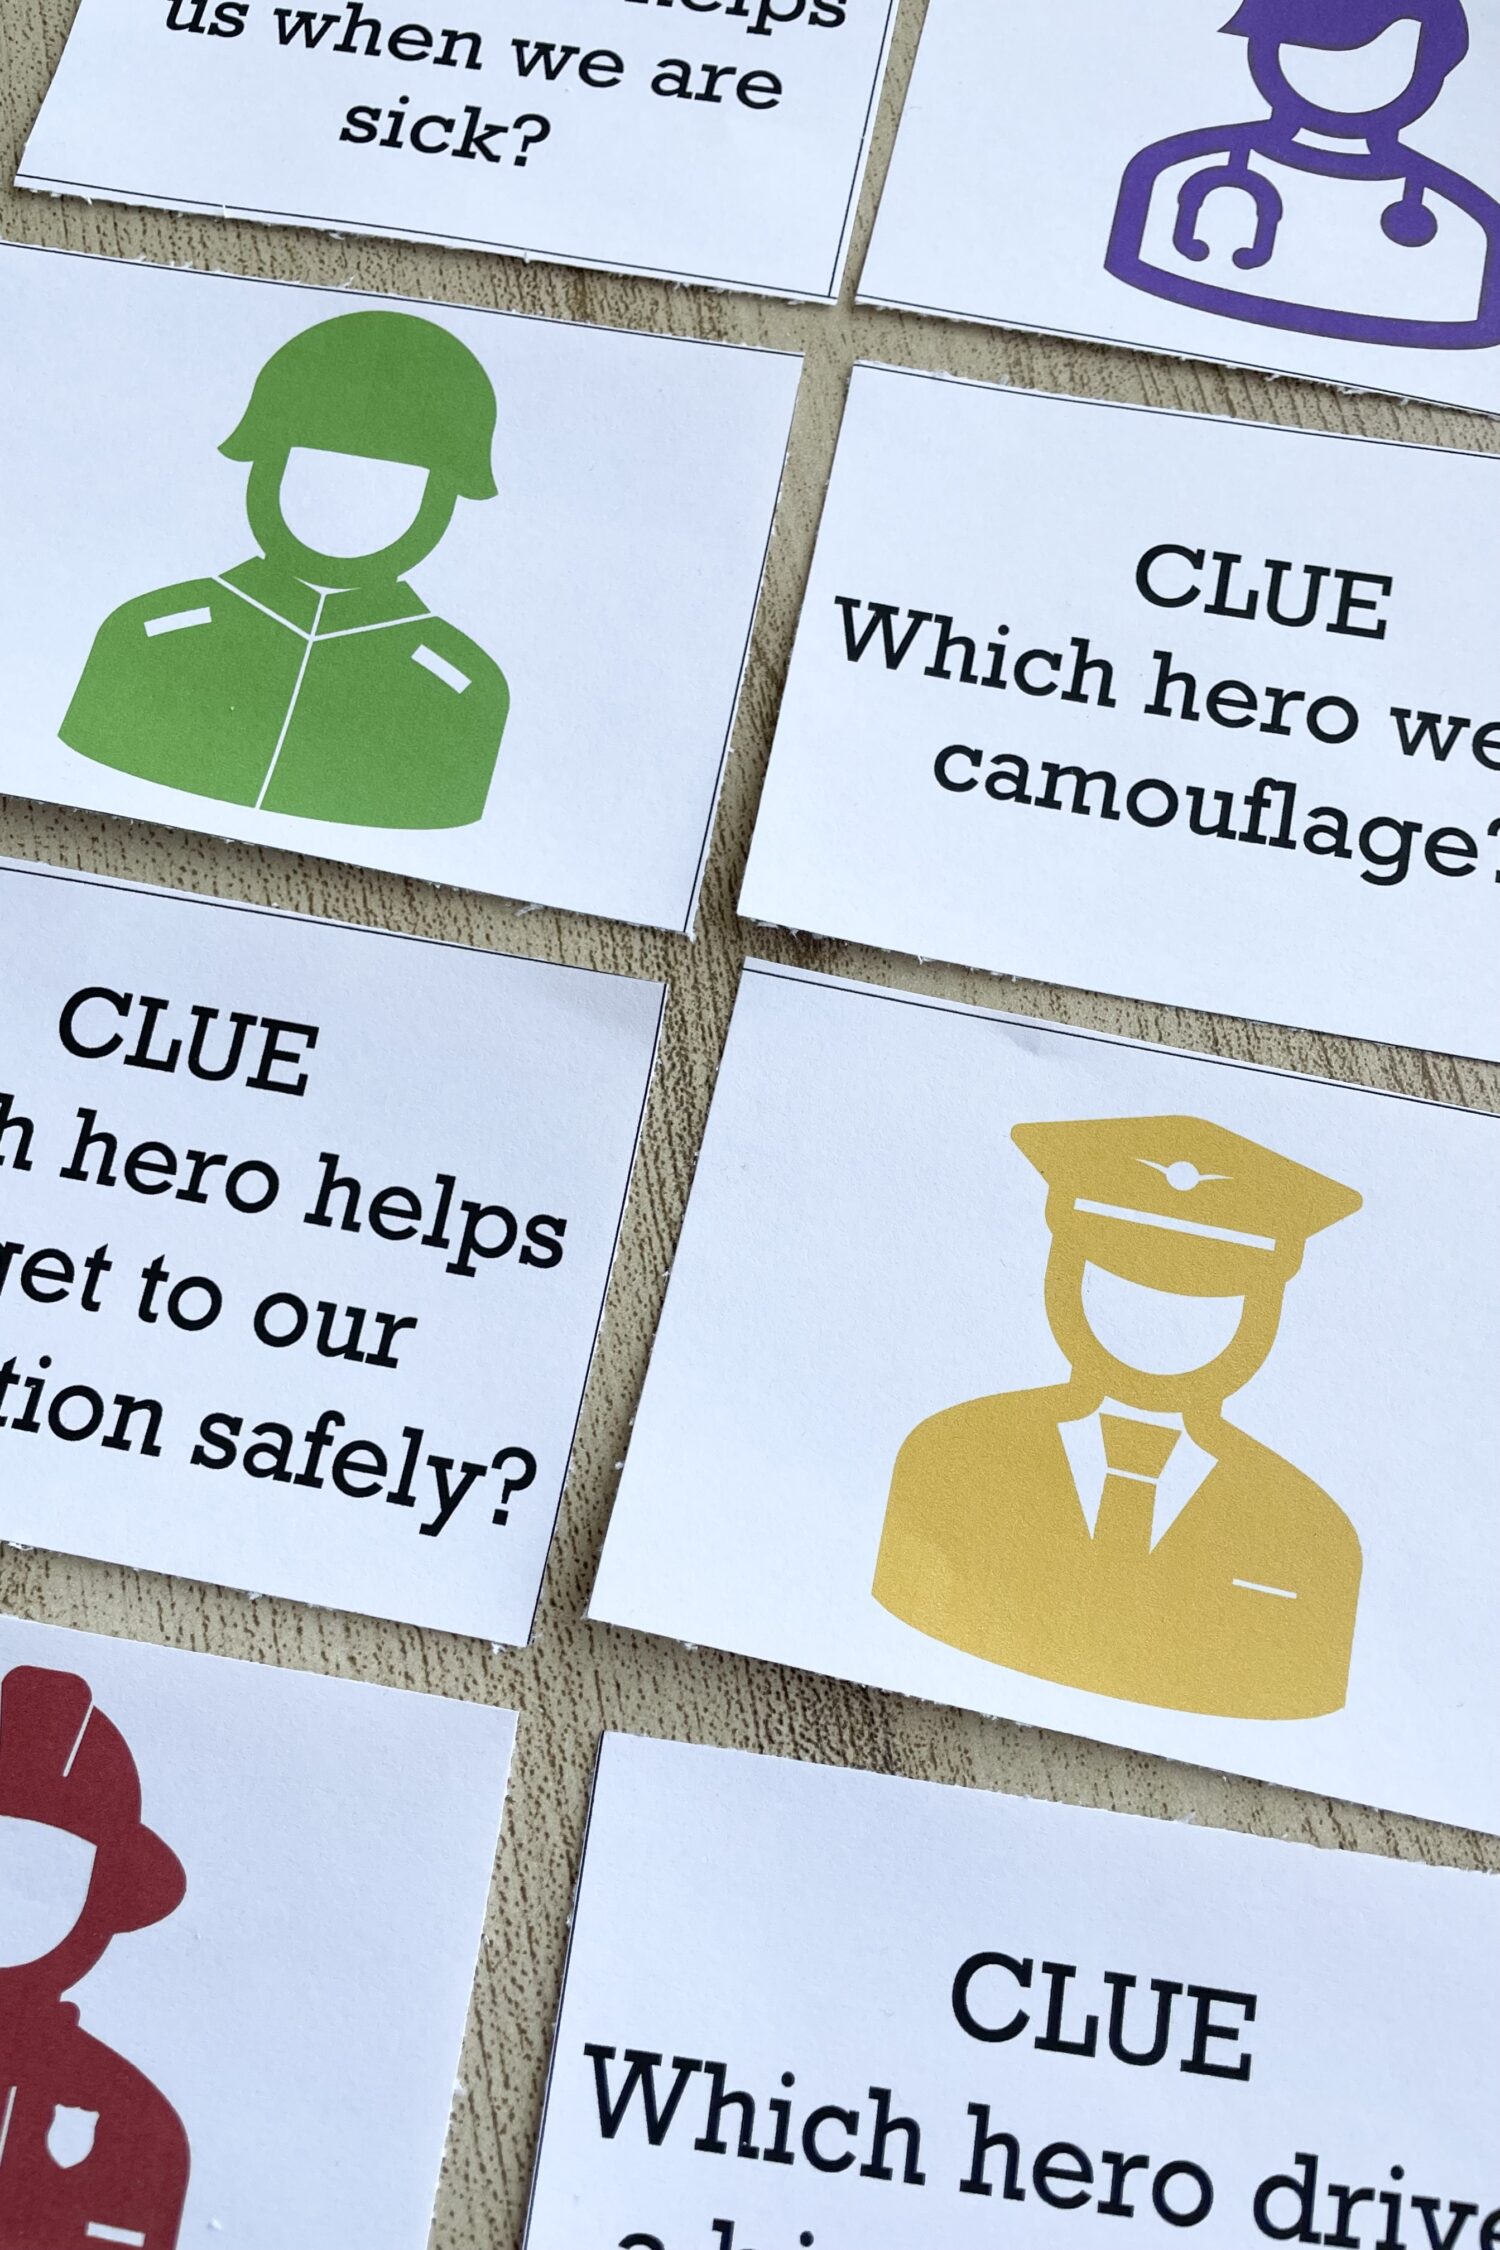 I See a Hero Name the Hero - Father's Day singing time idea with printable song helps with different types of heroes for LDS Primary Music Leaders.